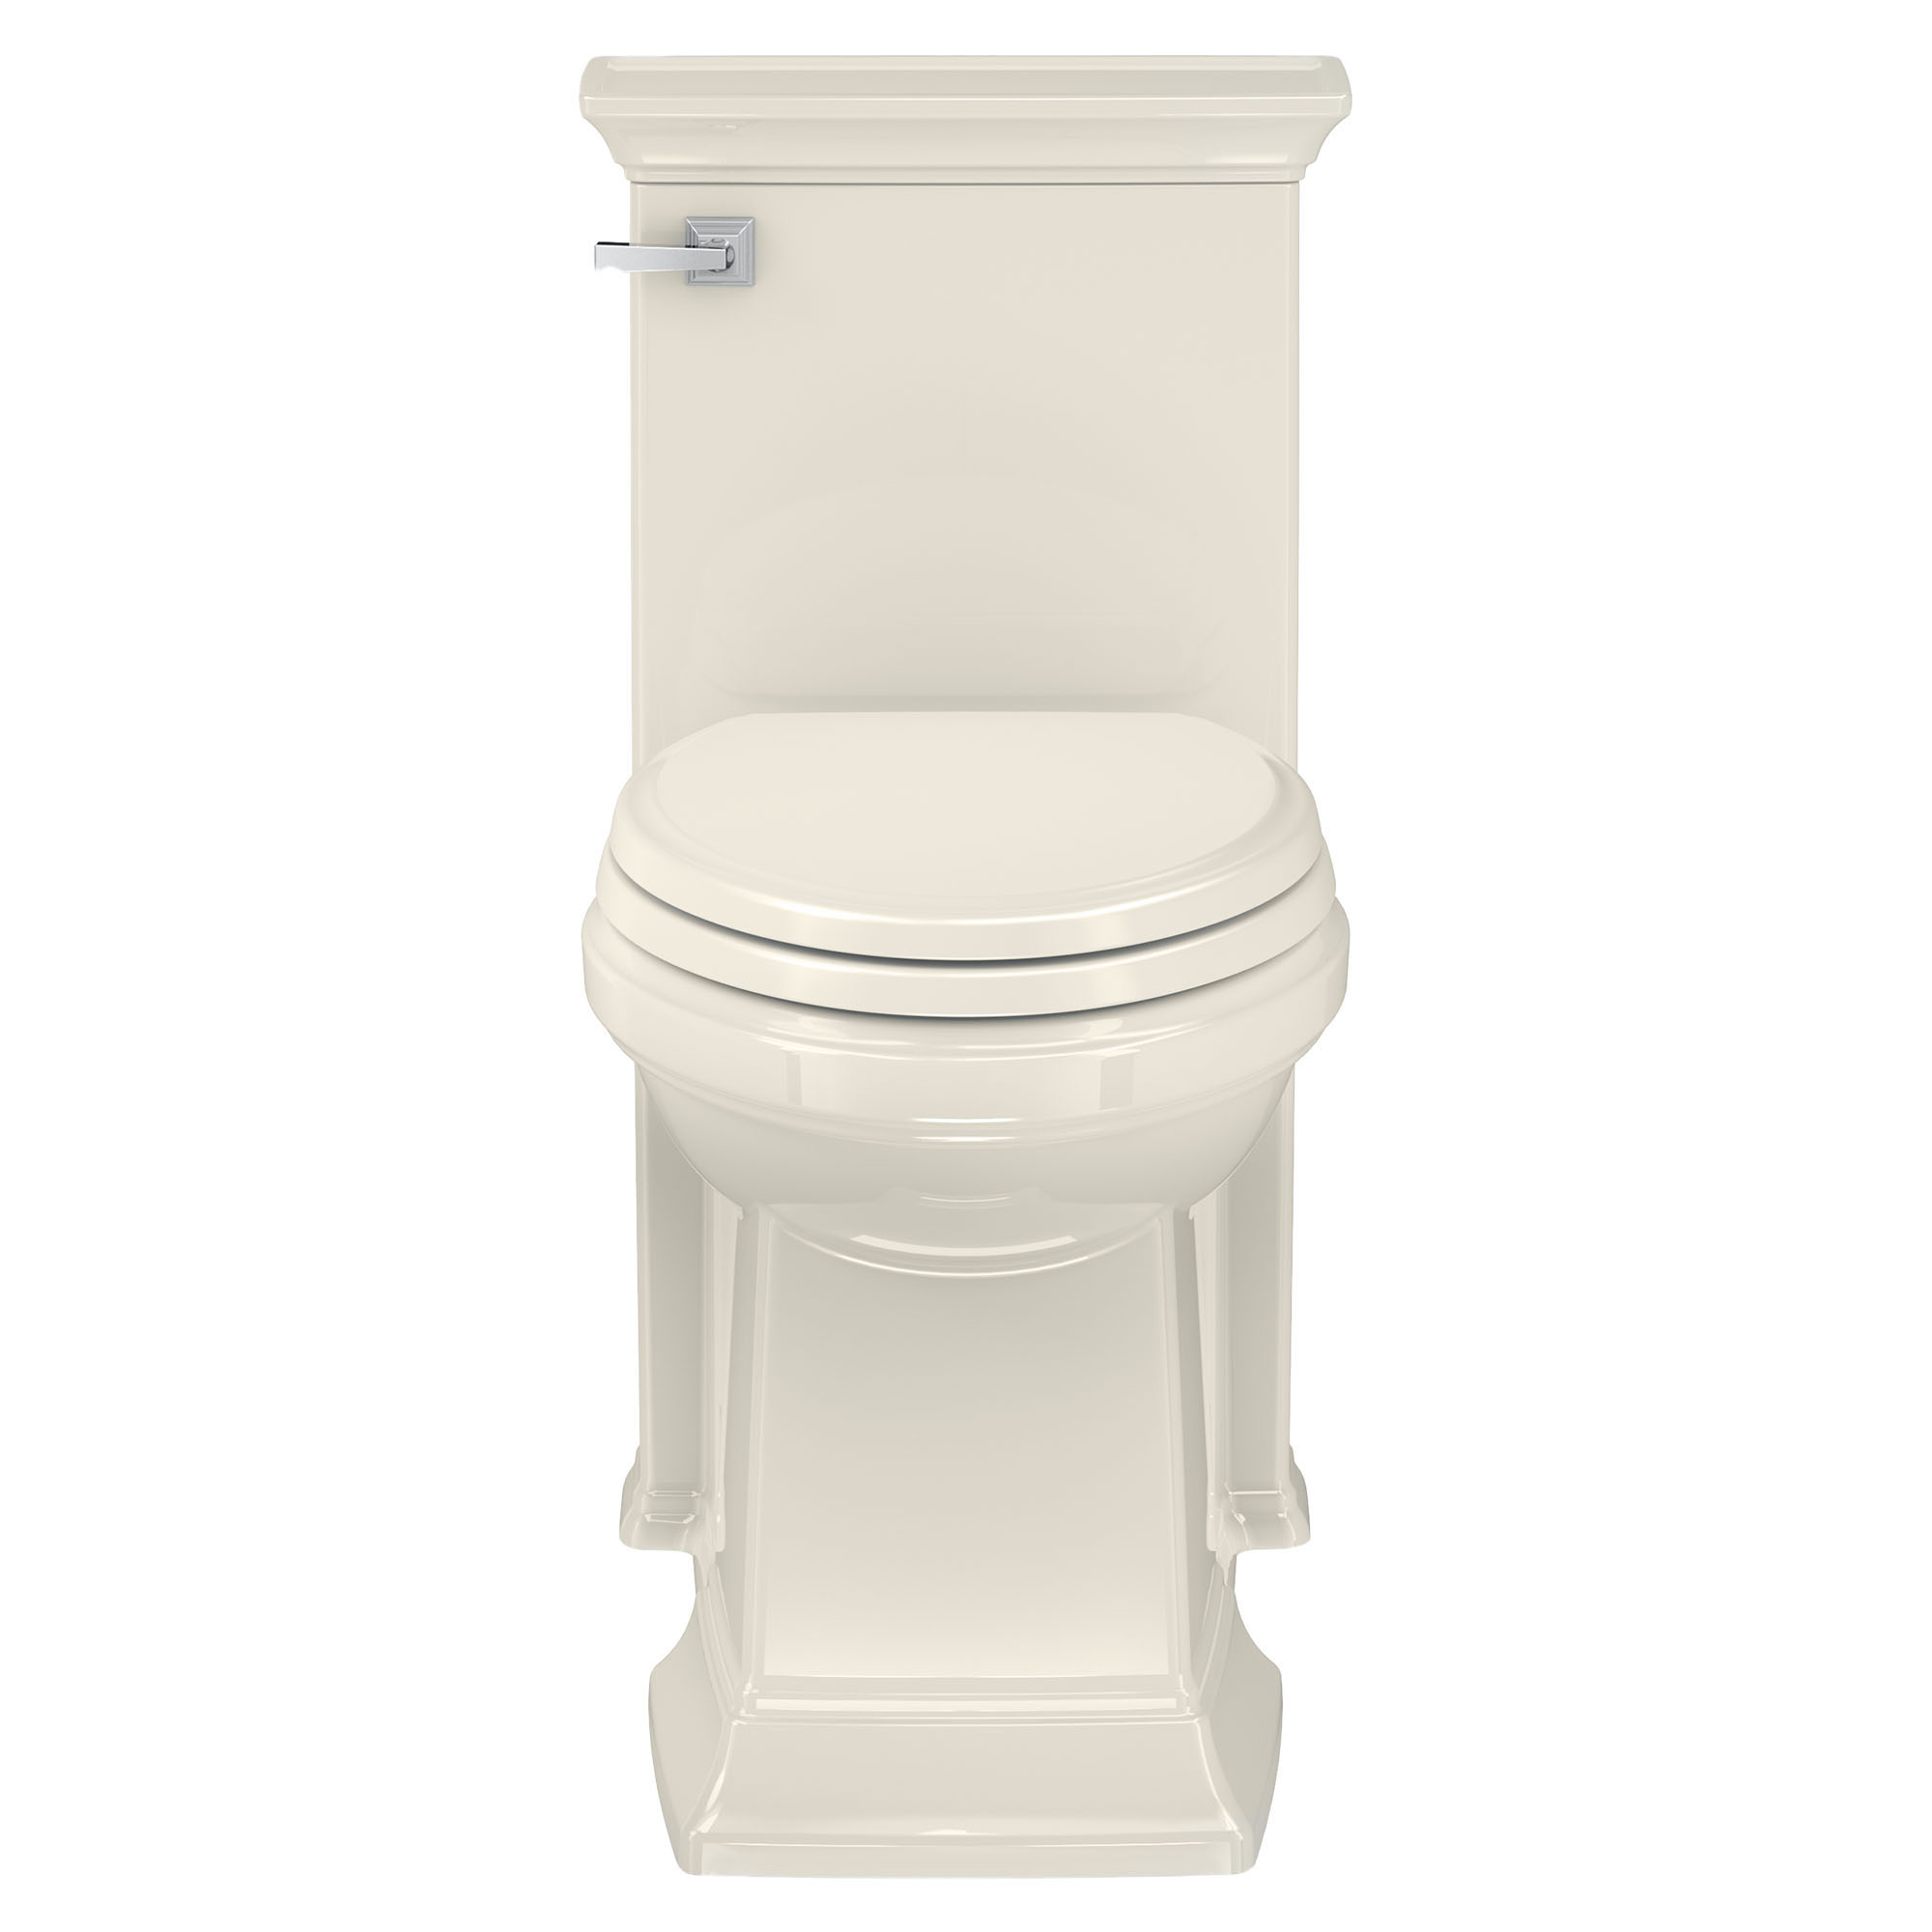 Town Square™ S One-Piece 1.28 gpf/4.8 Lpf Chair Height Elongated Toilet With Seat